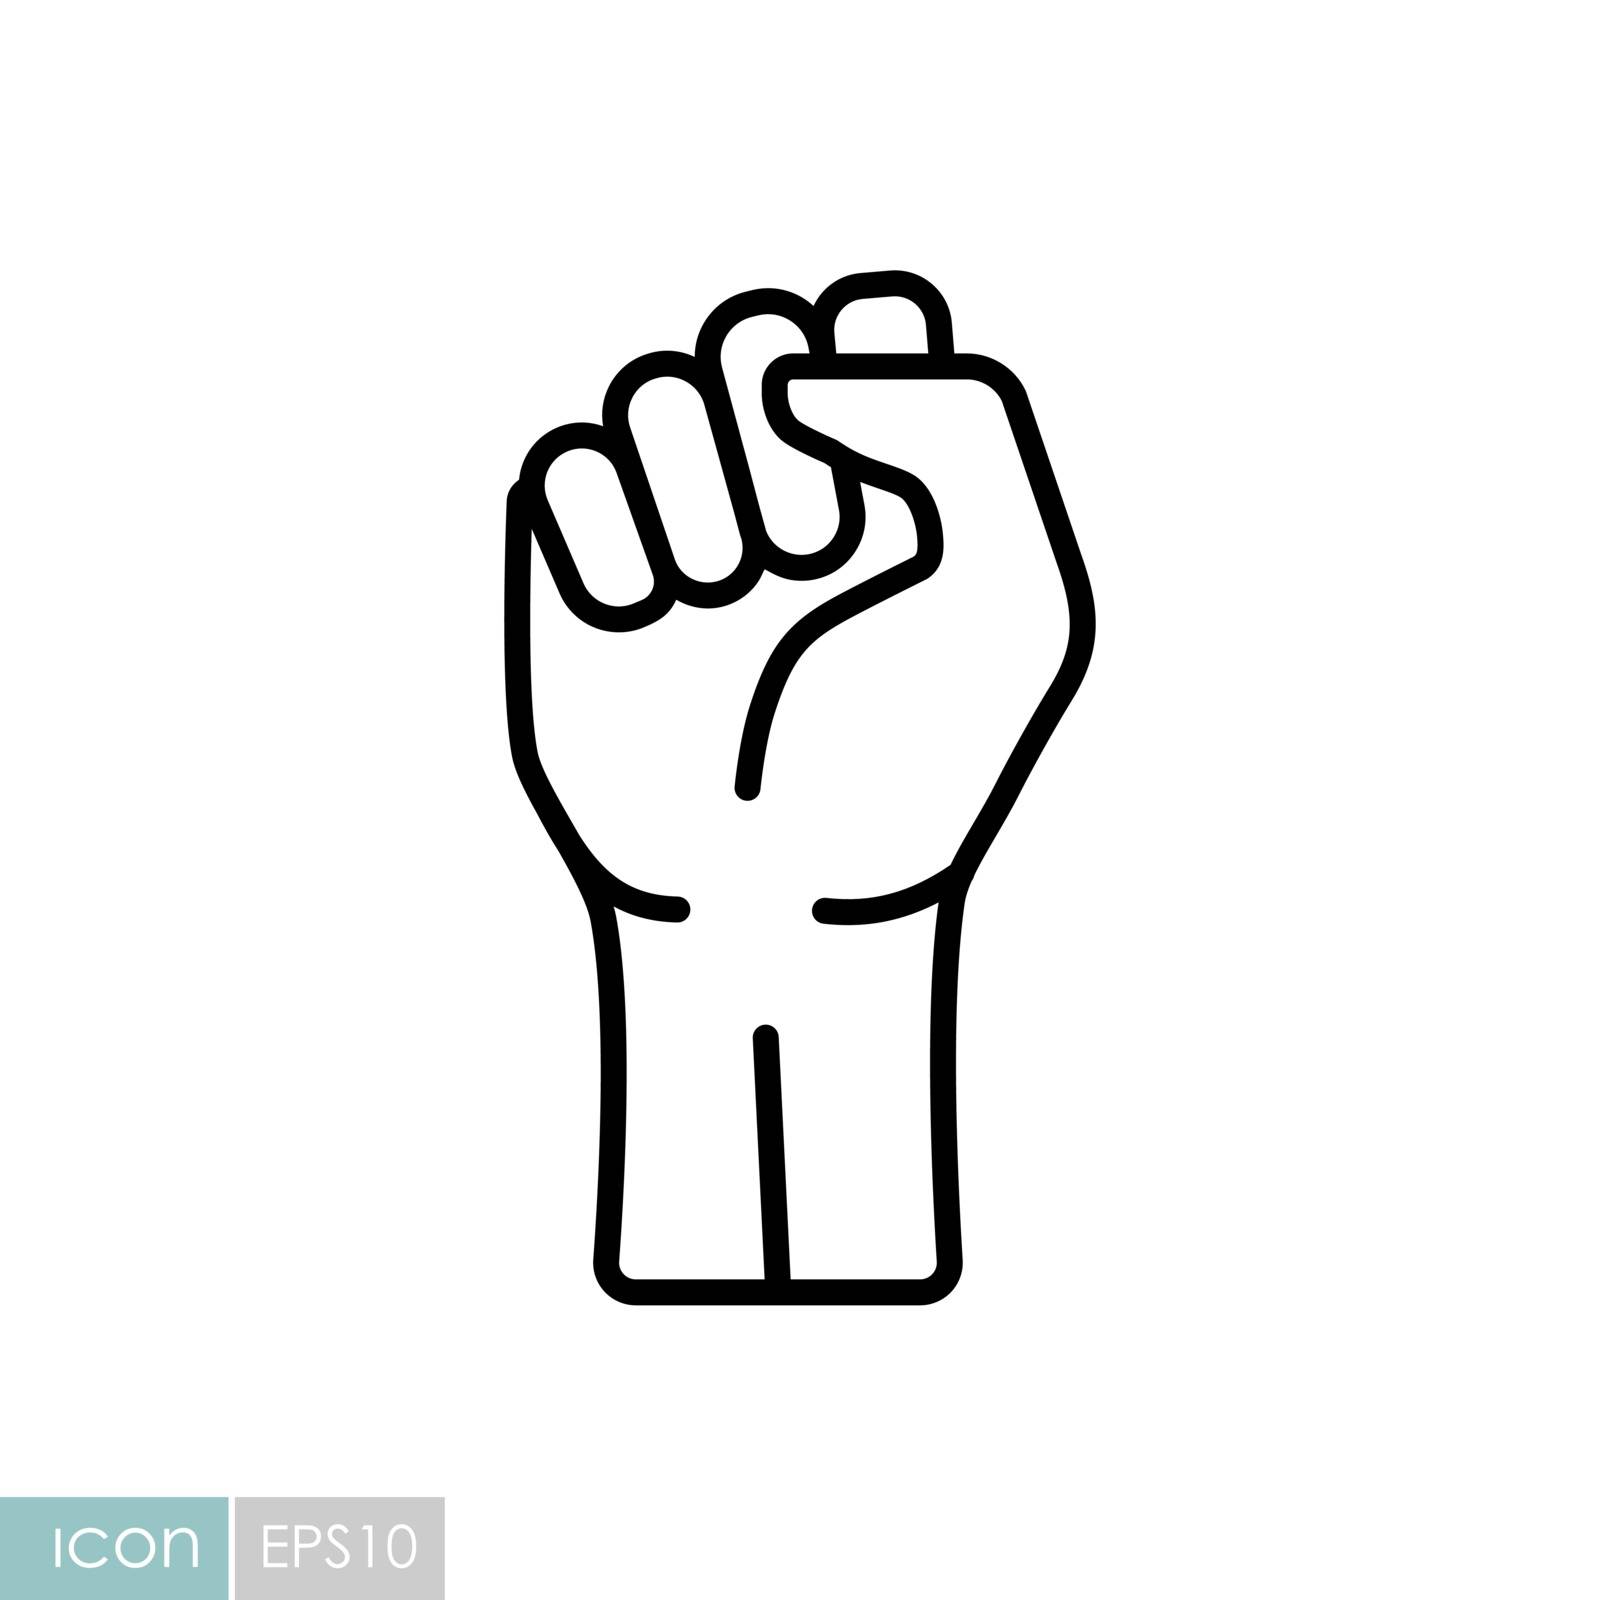 Fist raised up vector icon by nosik